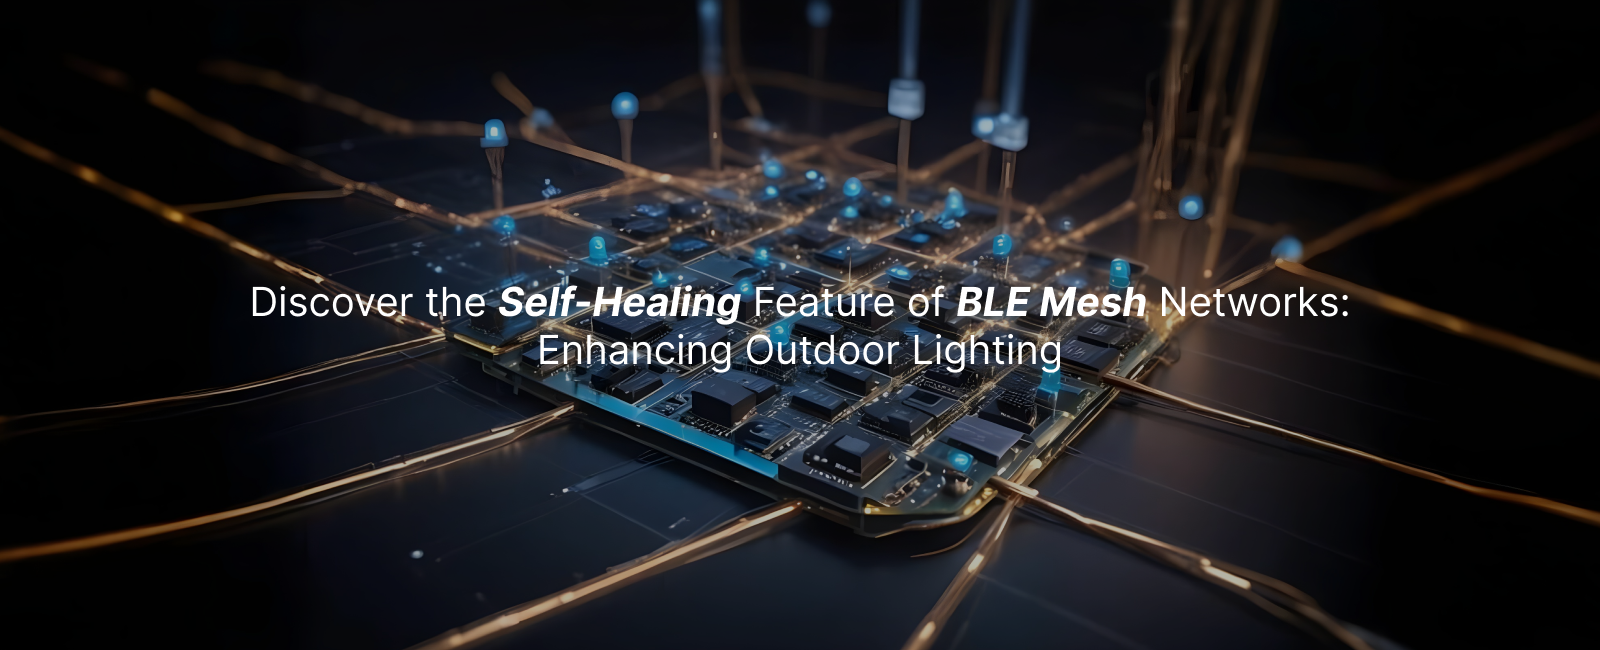 Discover the Self-Healing Magic of BLE Mesh Networks